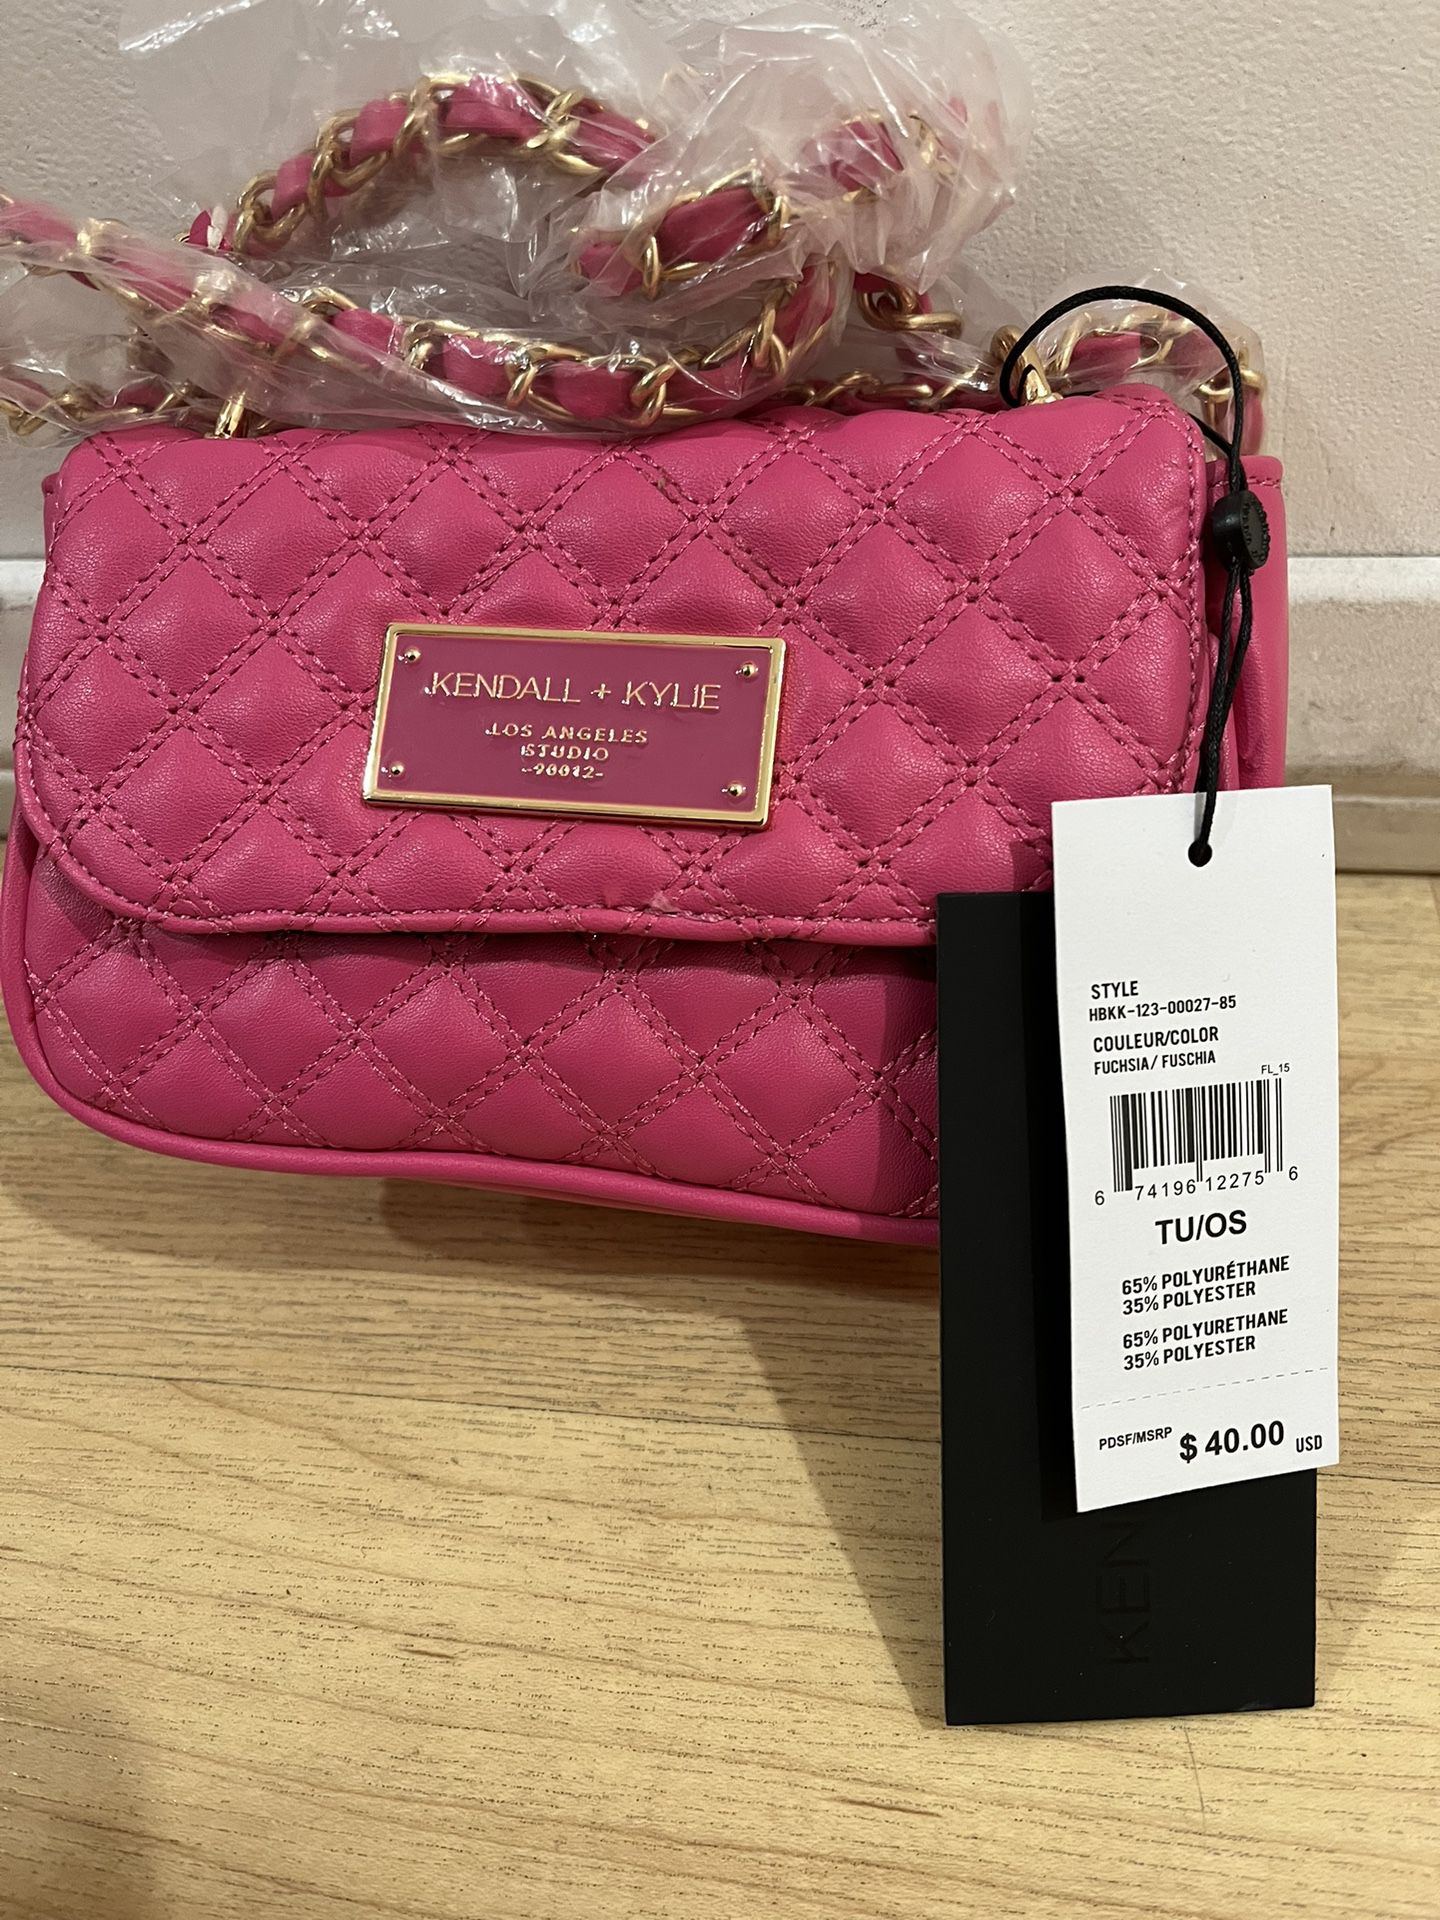 New Kendall + Kylie Purse for Sale in Gardena, CA - OfferUp